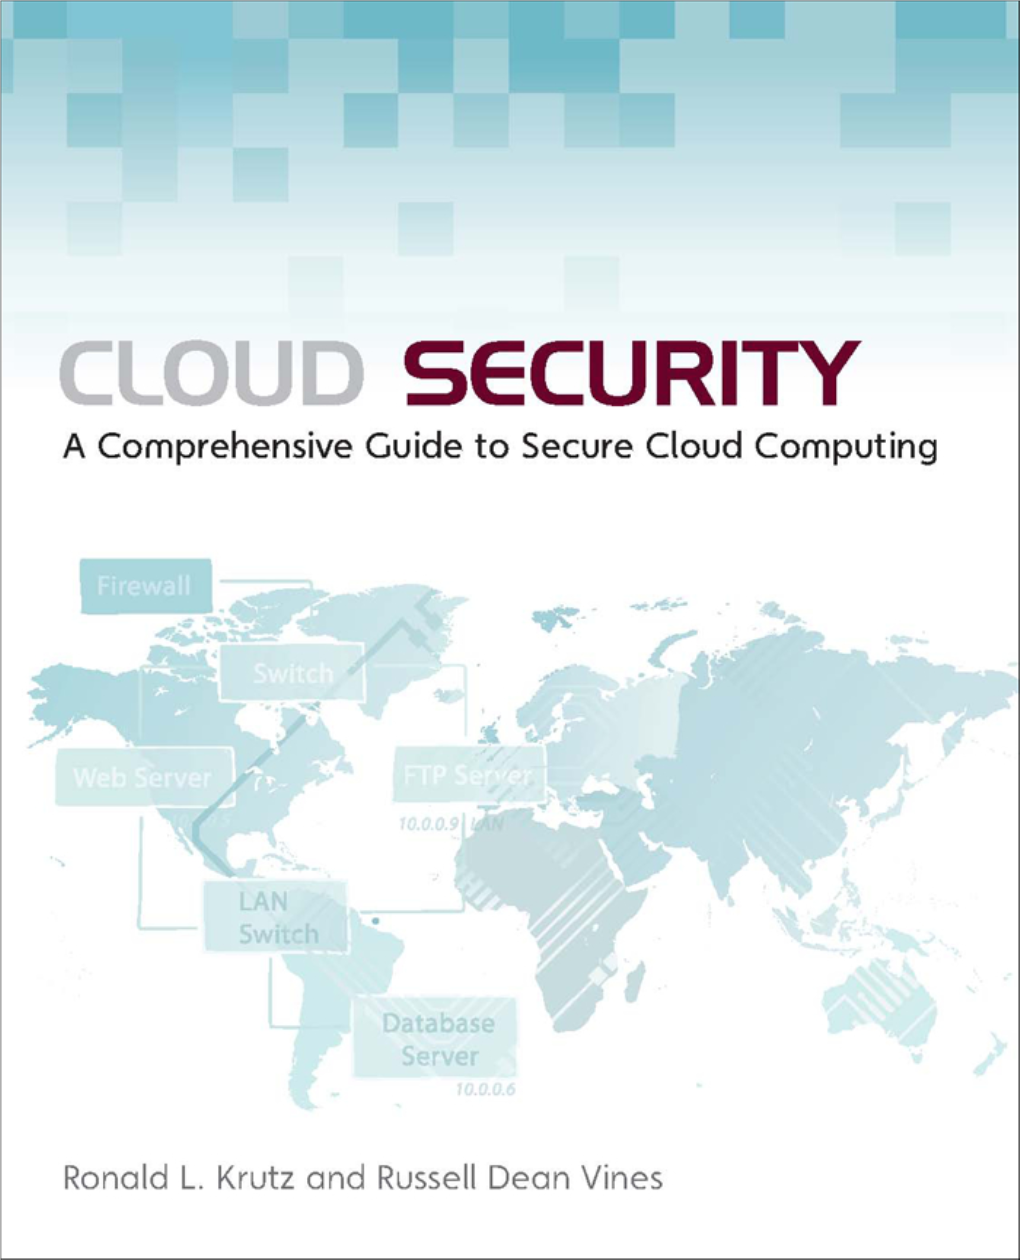 Cloud Security: a Comprehensive Guide to Secure Cloud Computing